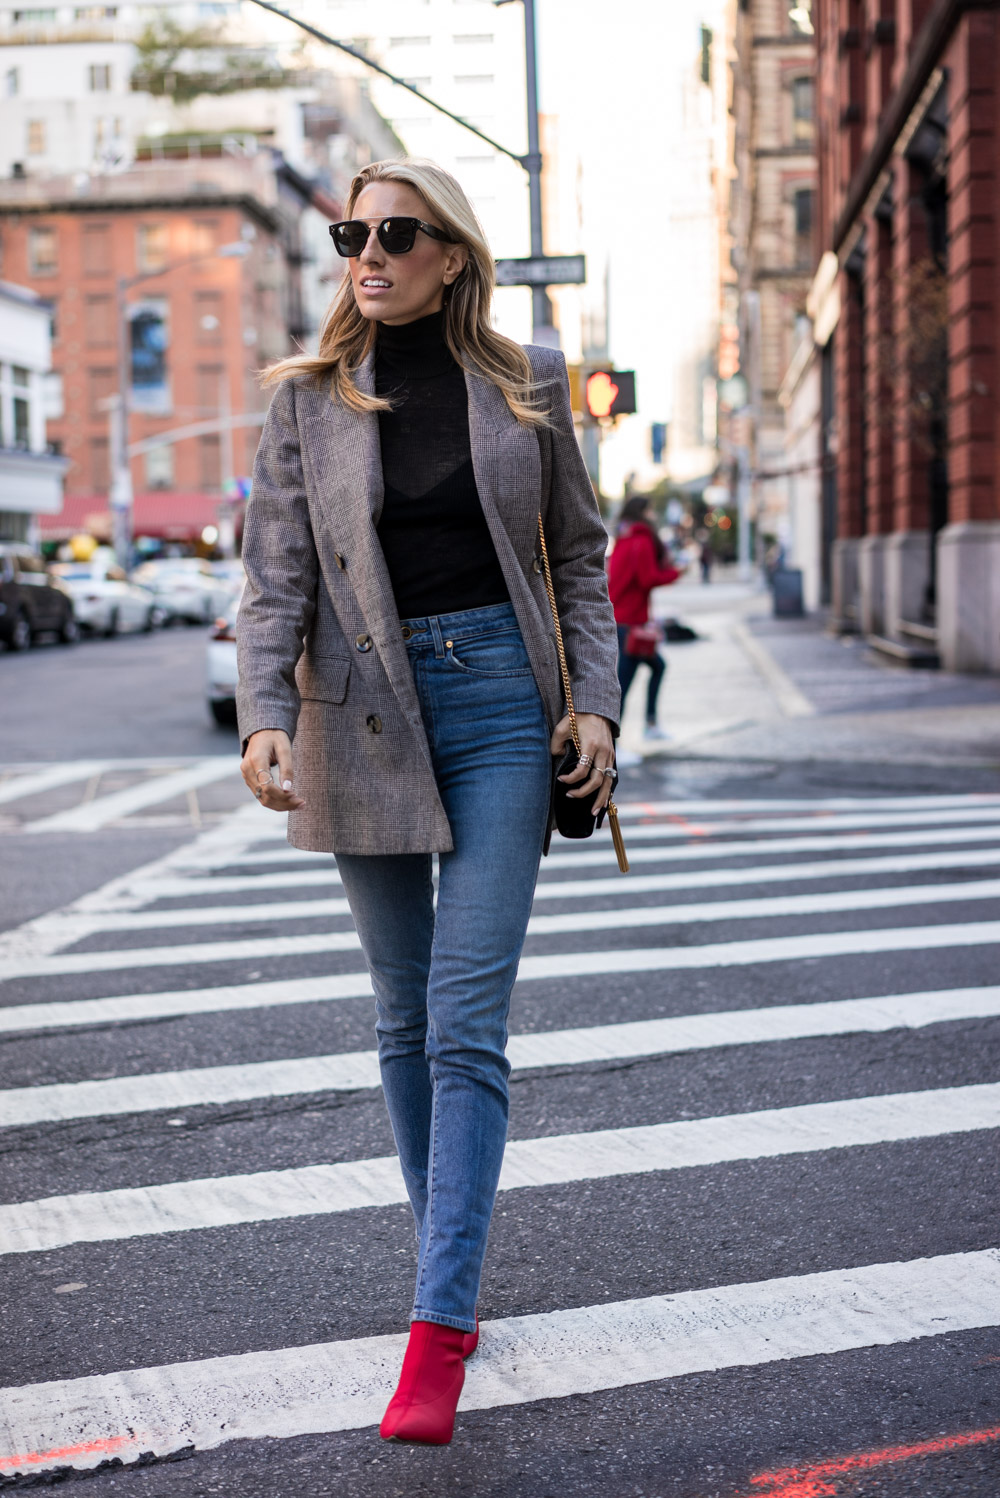 Velvet Top Thanksgiving Outfit & Where to Shop for Black Friday - Lisa  DiCicco Cahue